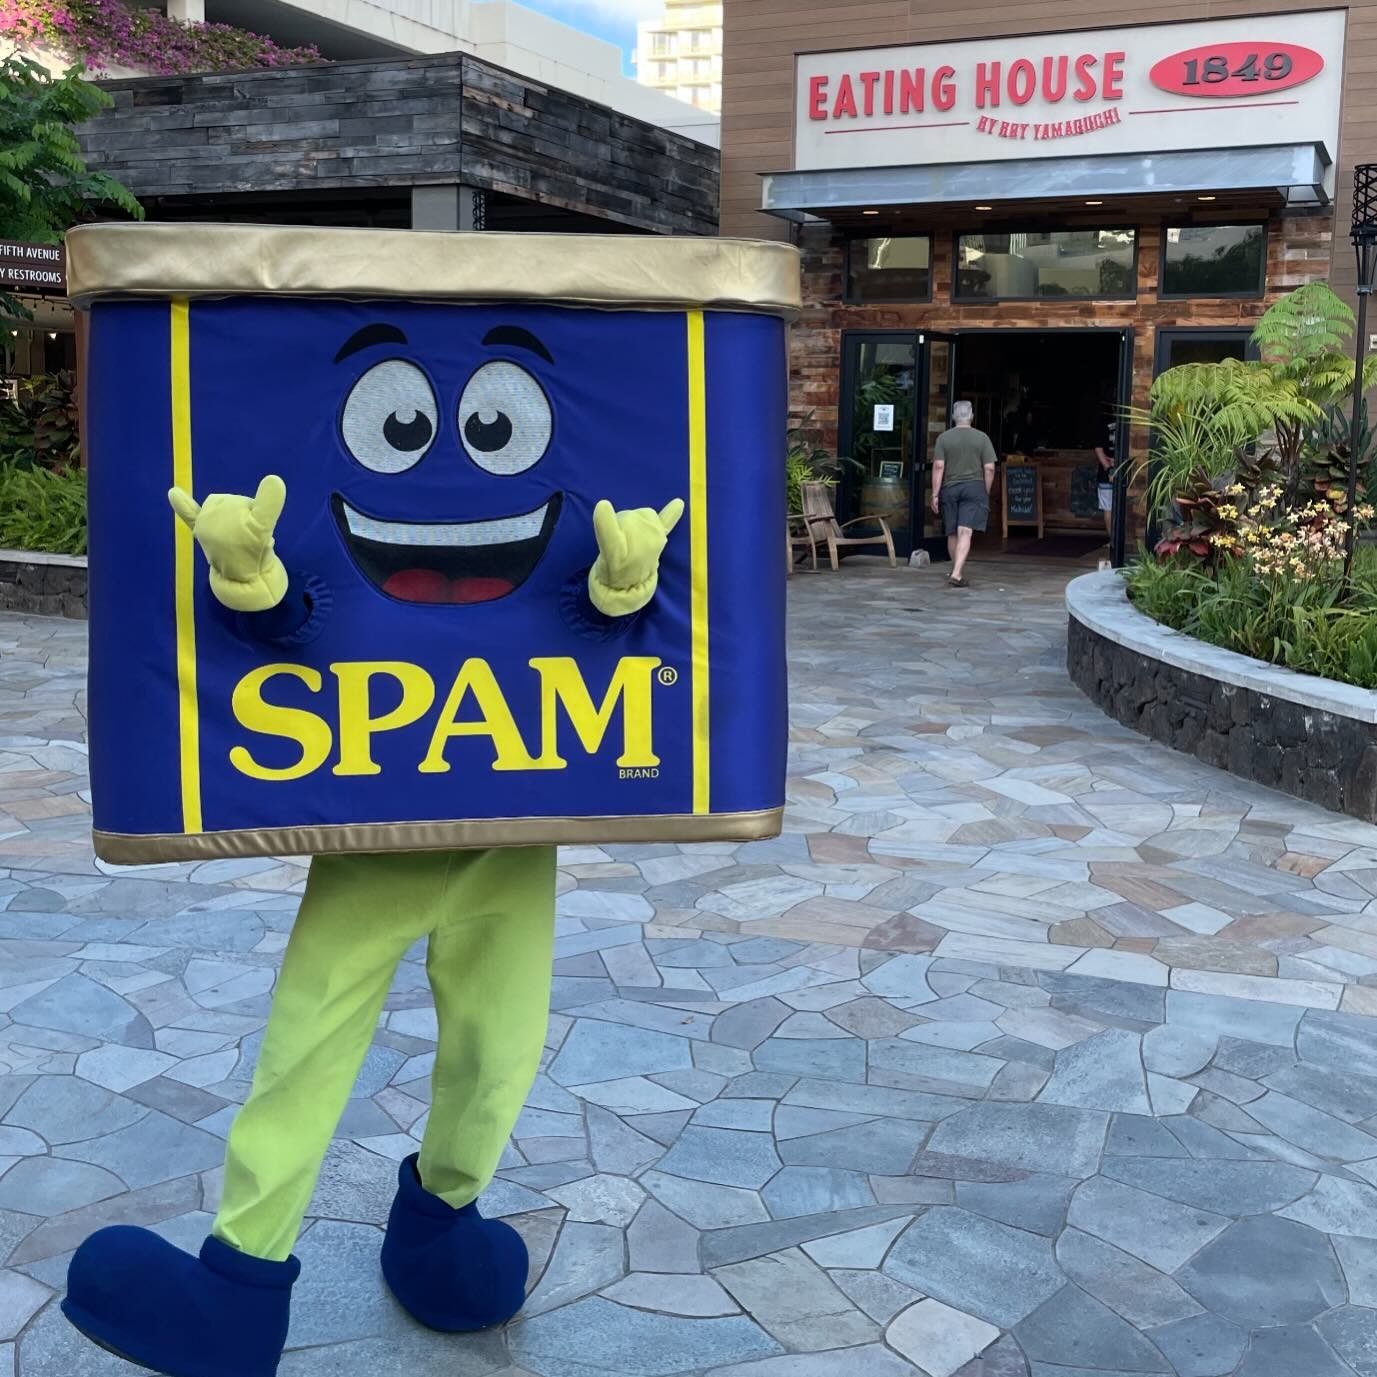 We are getting excited for our in restaurant dine in event that begins on April 20 and runs until May 5! Visit our website to see the exclusive SPAM dishes that start this Saturday at participating Waikiki restaurants!